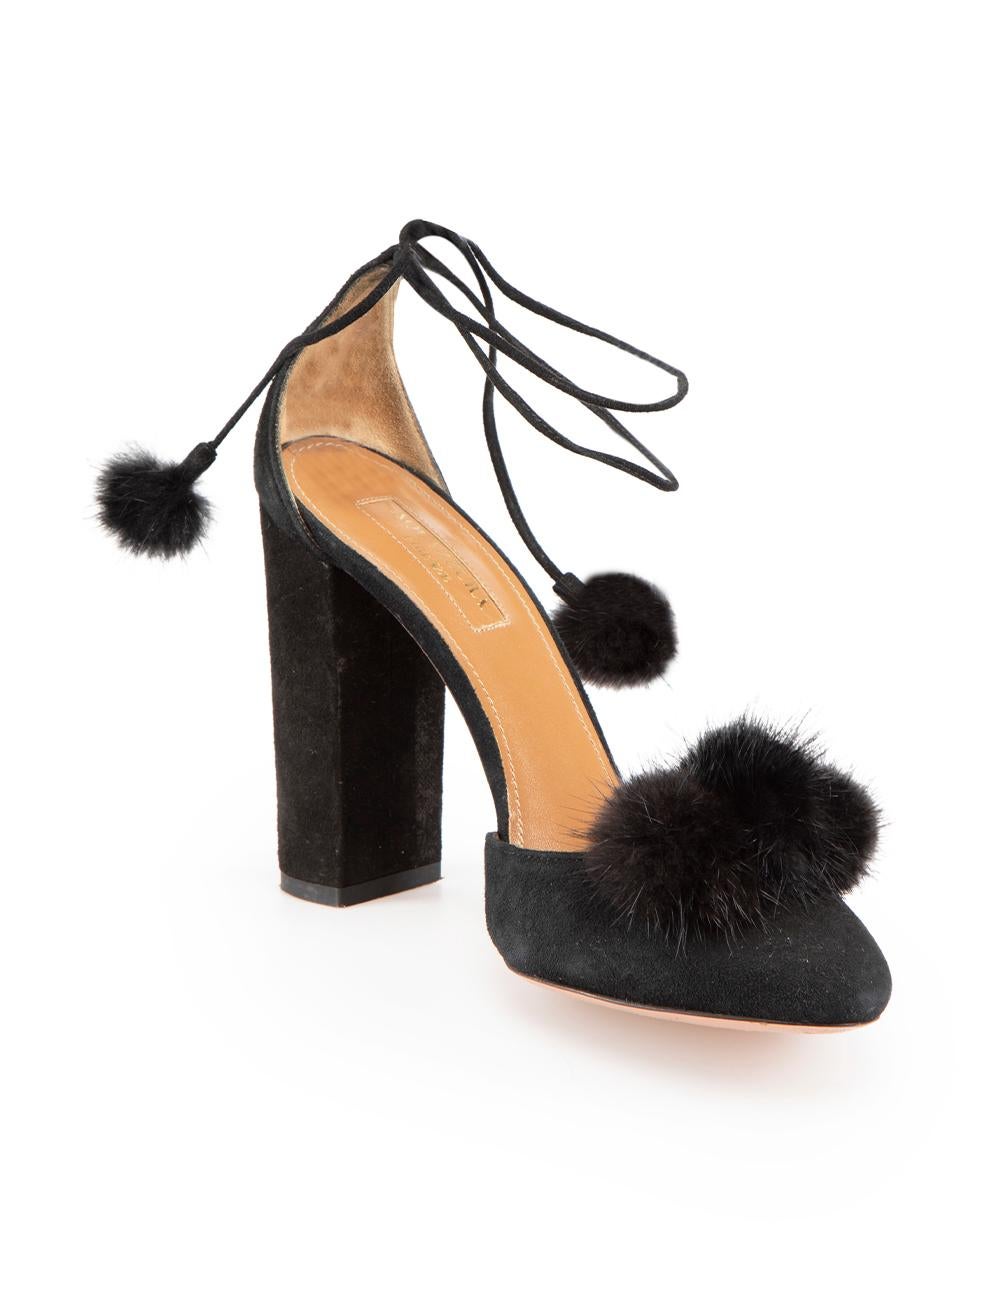 CONDITION is Very good. Minimal wear to heels is evident. Minimal wear with abrasions to the leather of both heels and toes on this used Aquazzura designer resale item.
 
 Details
 Black
 Suede
 Heels
 Almond toe
 Fur pom pom accent
 High block